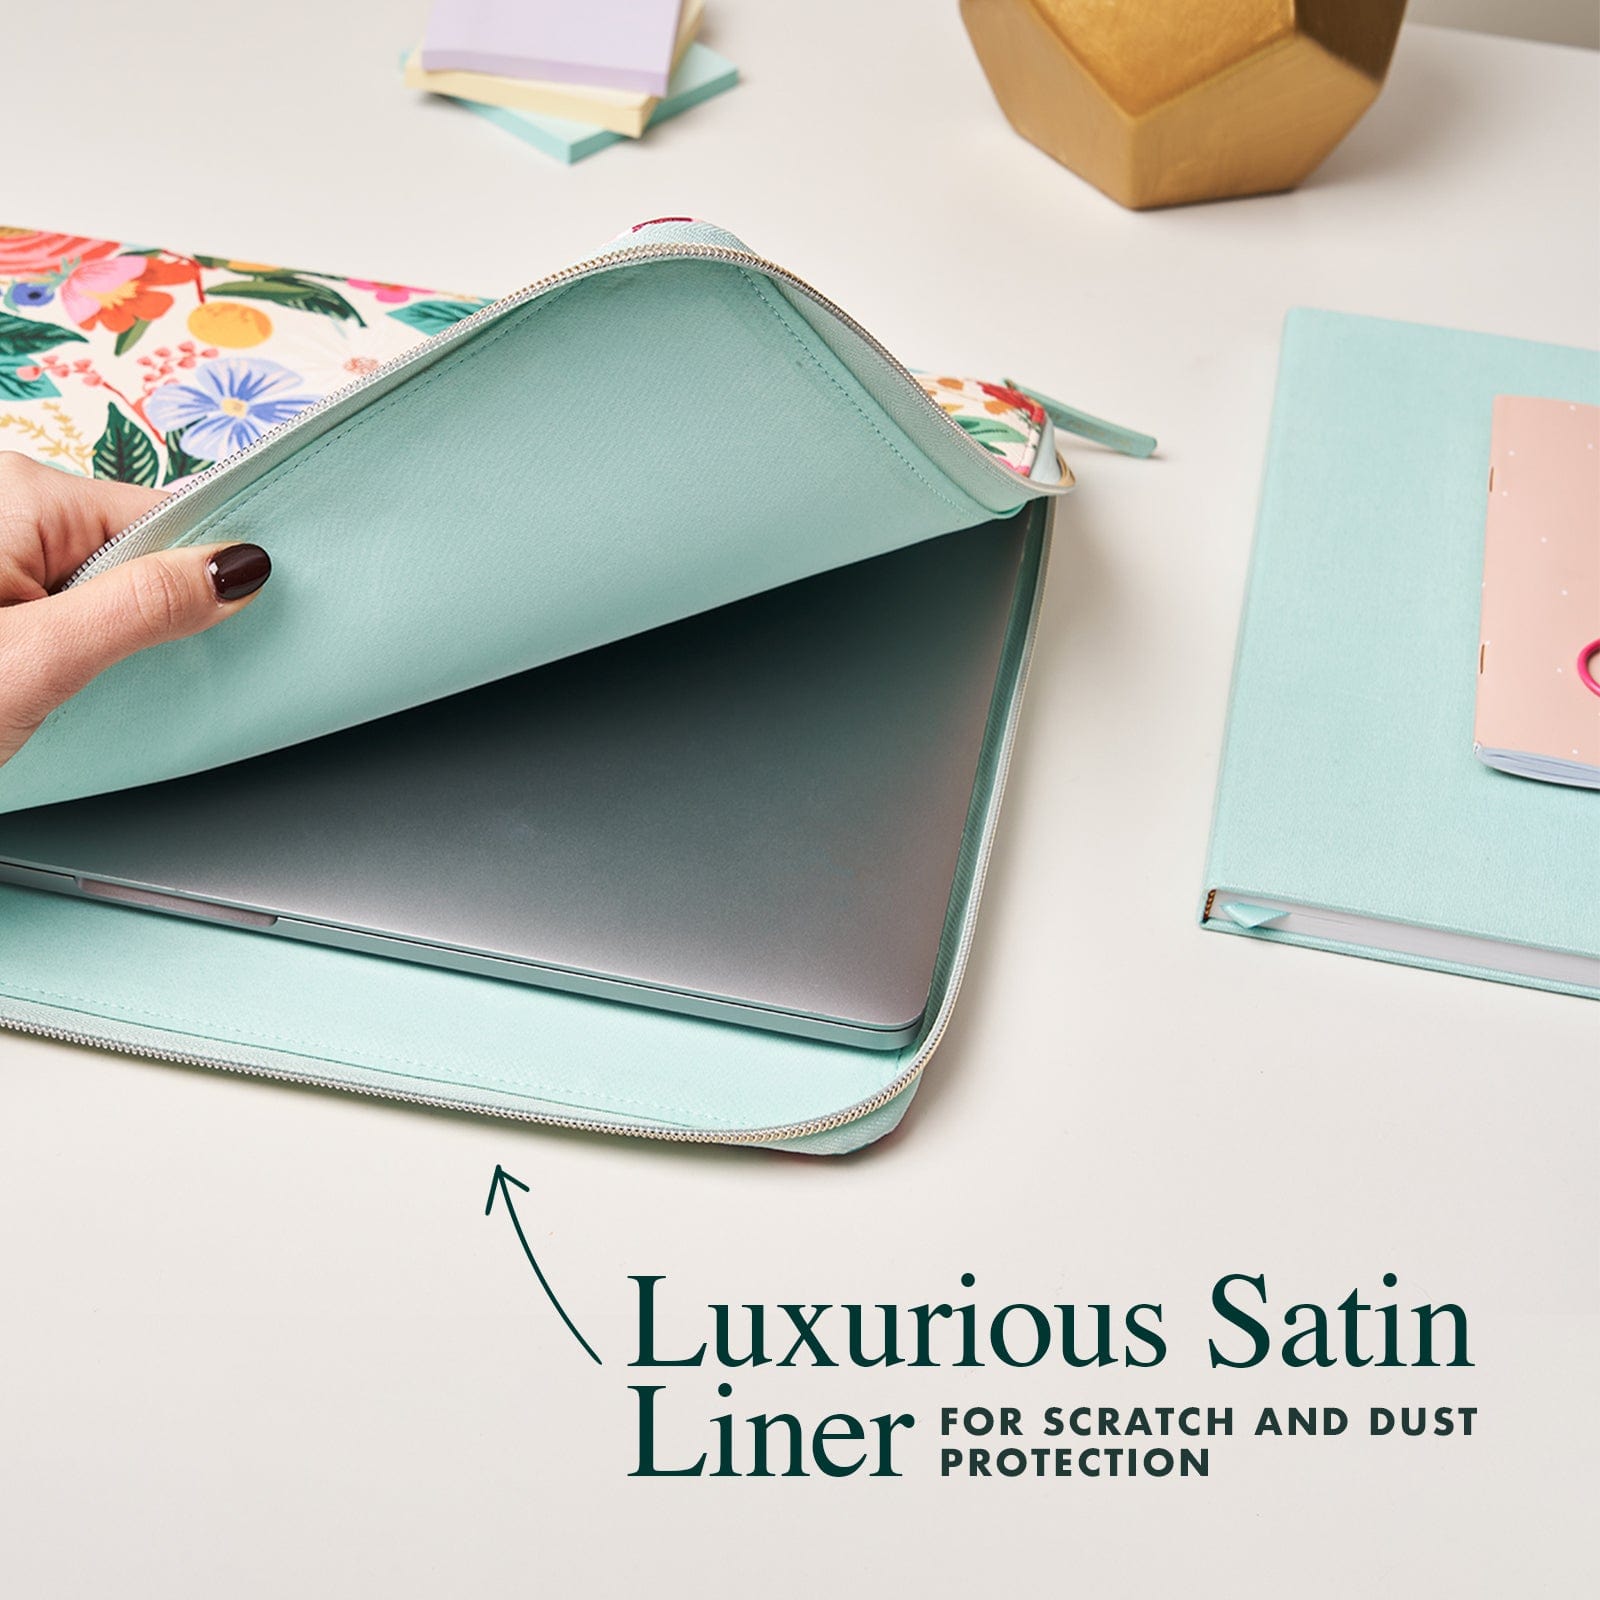 Luxurious Satin Liner for scratch and dust protection.